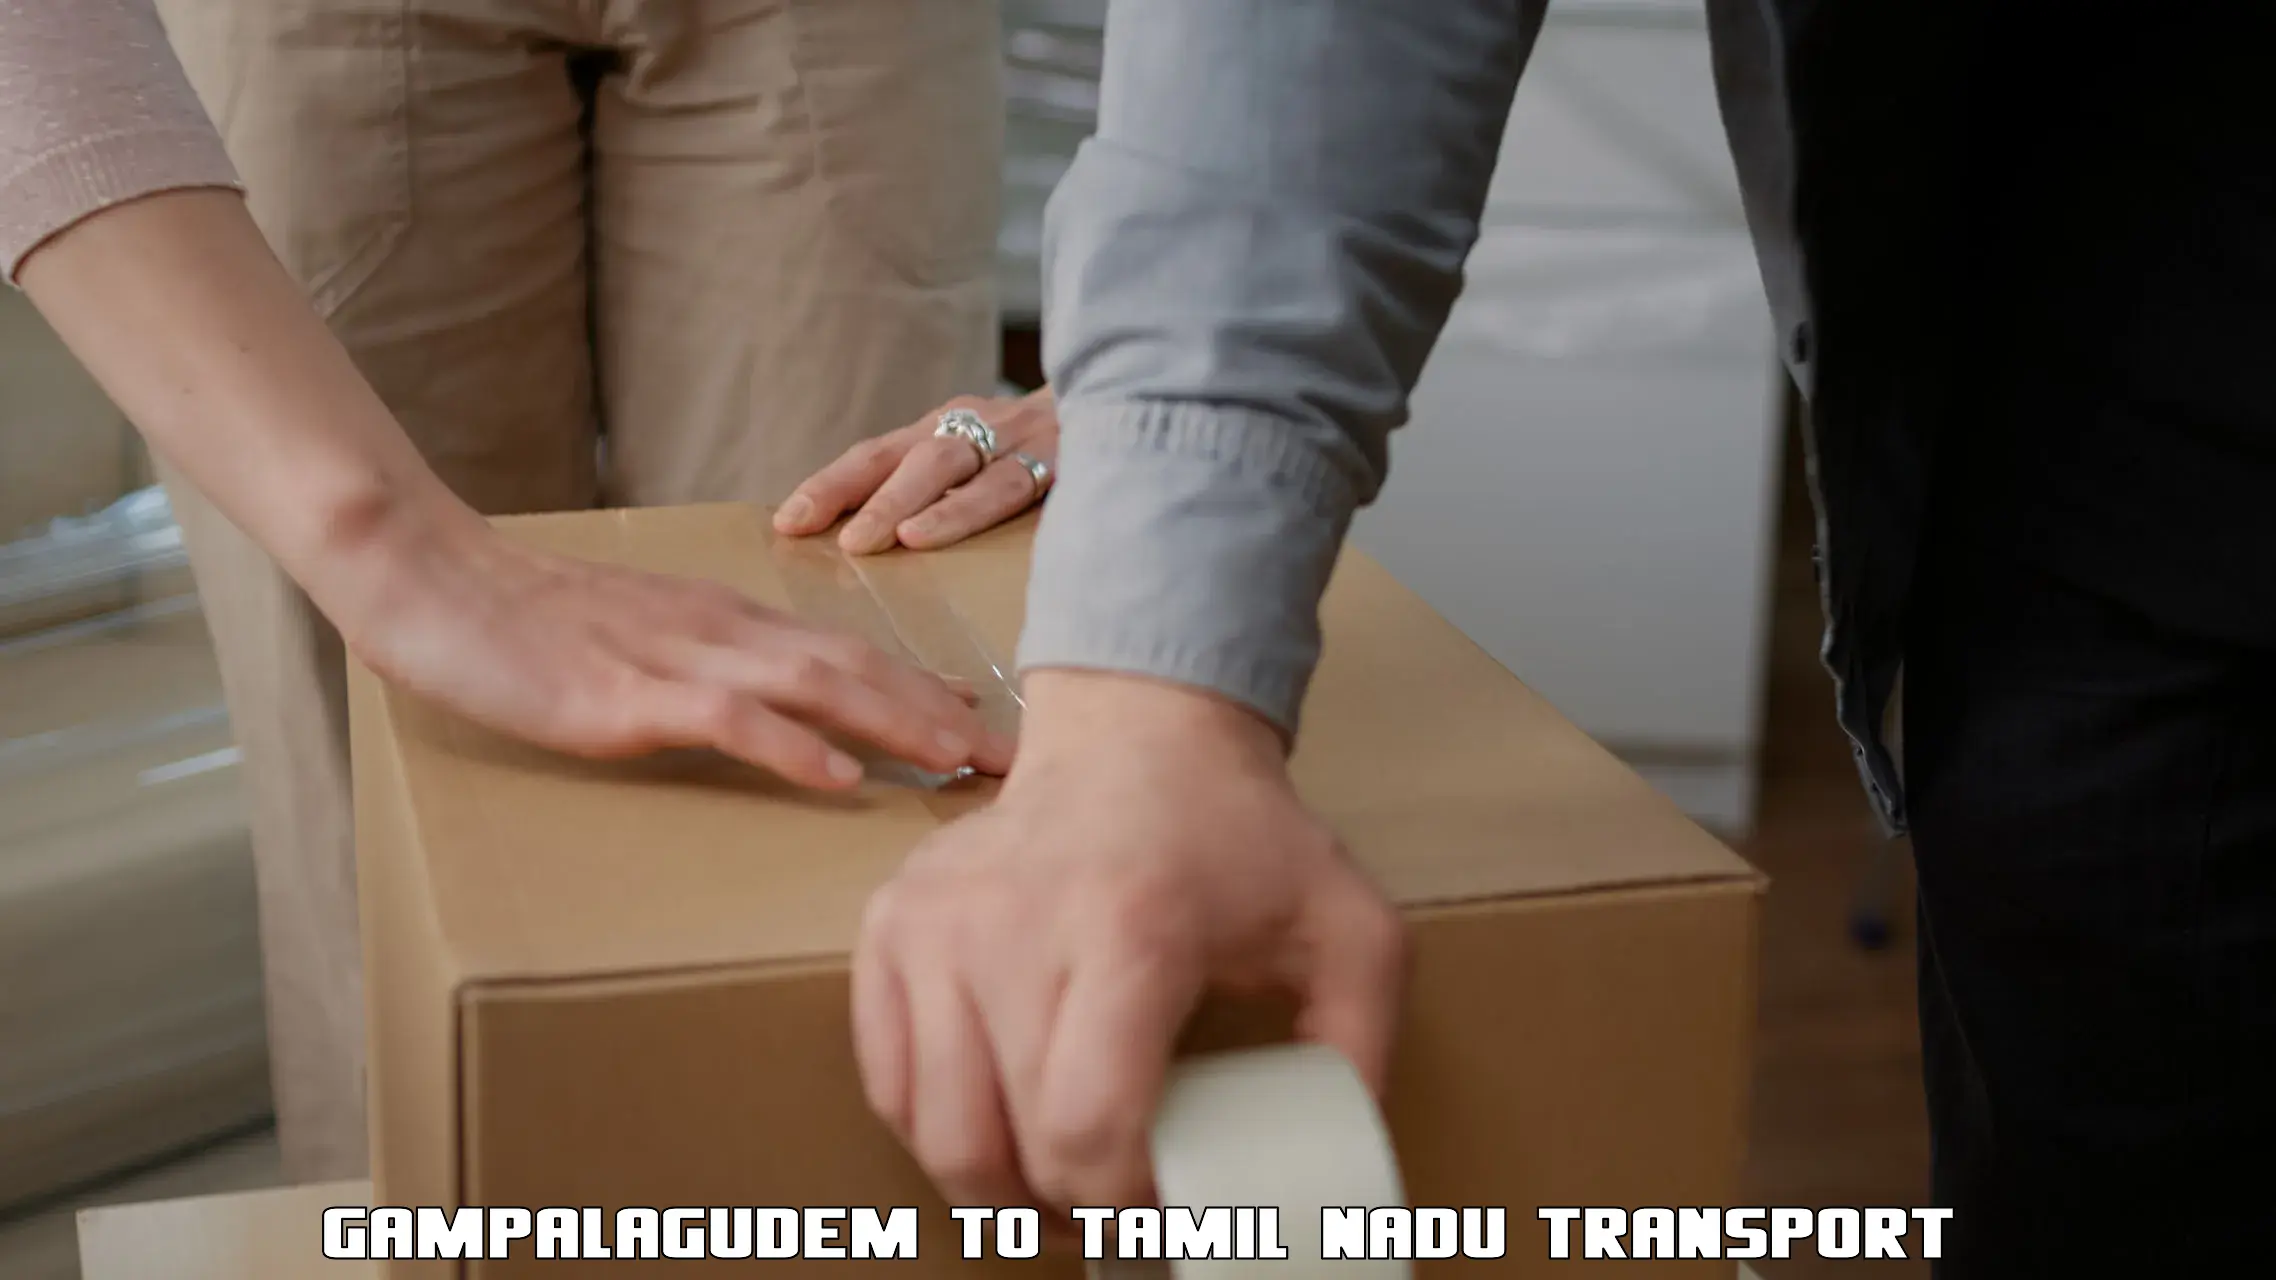 Shipping services Gampalagudem to Sri Ramachandra Institute of Higher Education and Research Chennai